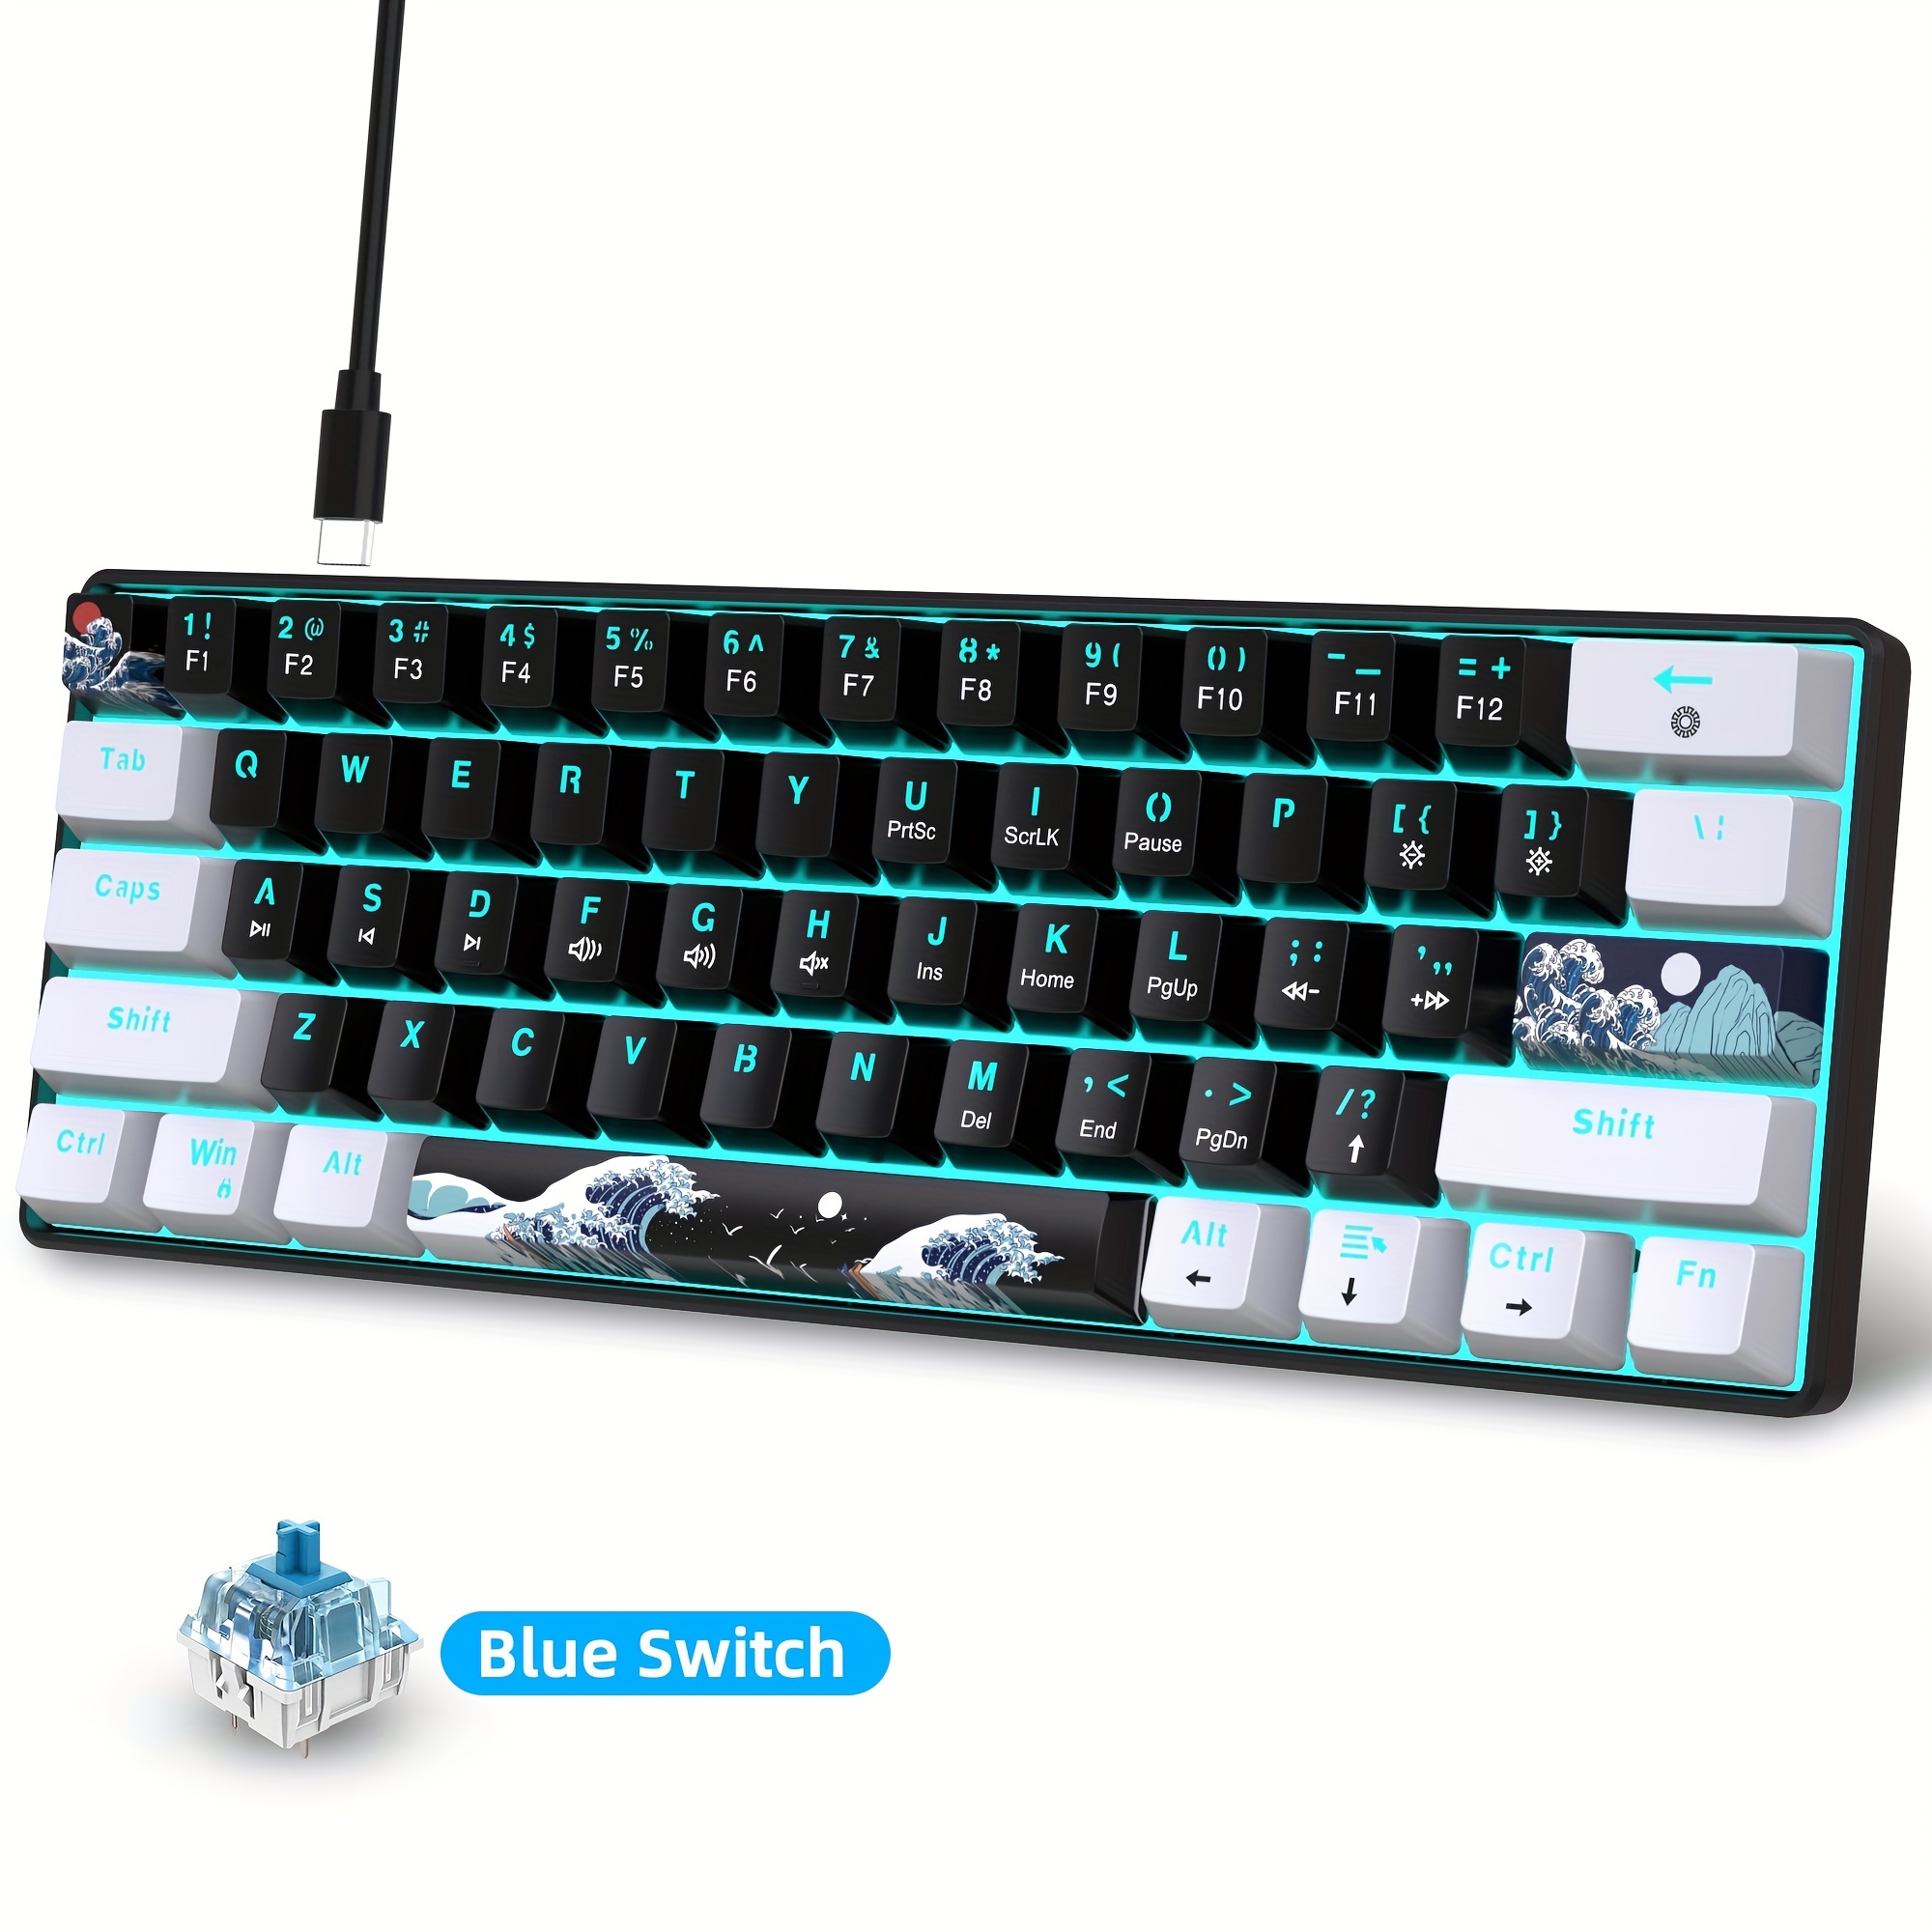 

Hxsj 60% Mechanical Gaming Keyboard With Blue Switches, Ergonomic, Water-resistant, Backlit, Usb-a Connectivity, Includes Usb Cable And Keycap Puller - Compact Design For Gamers